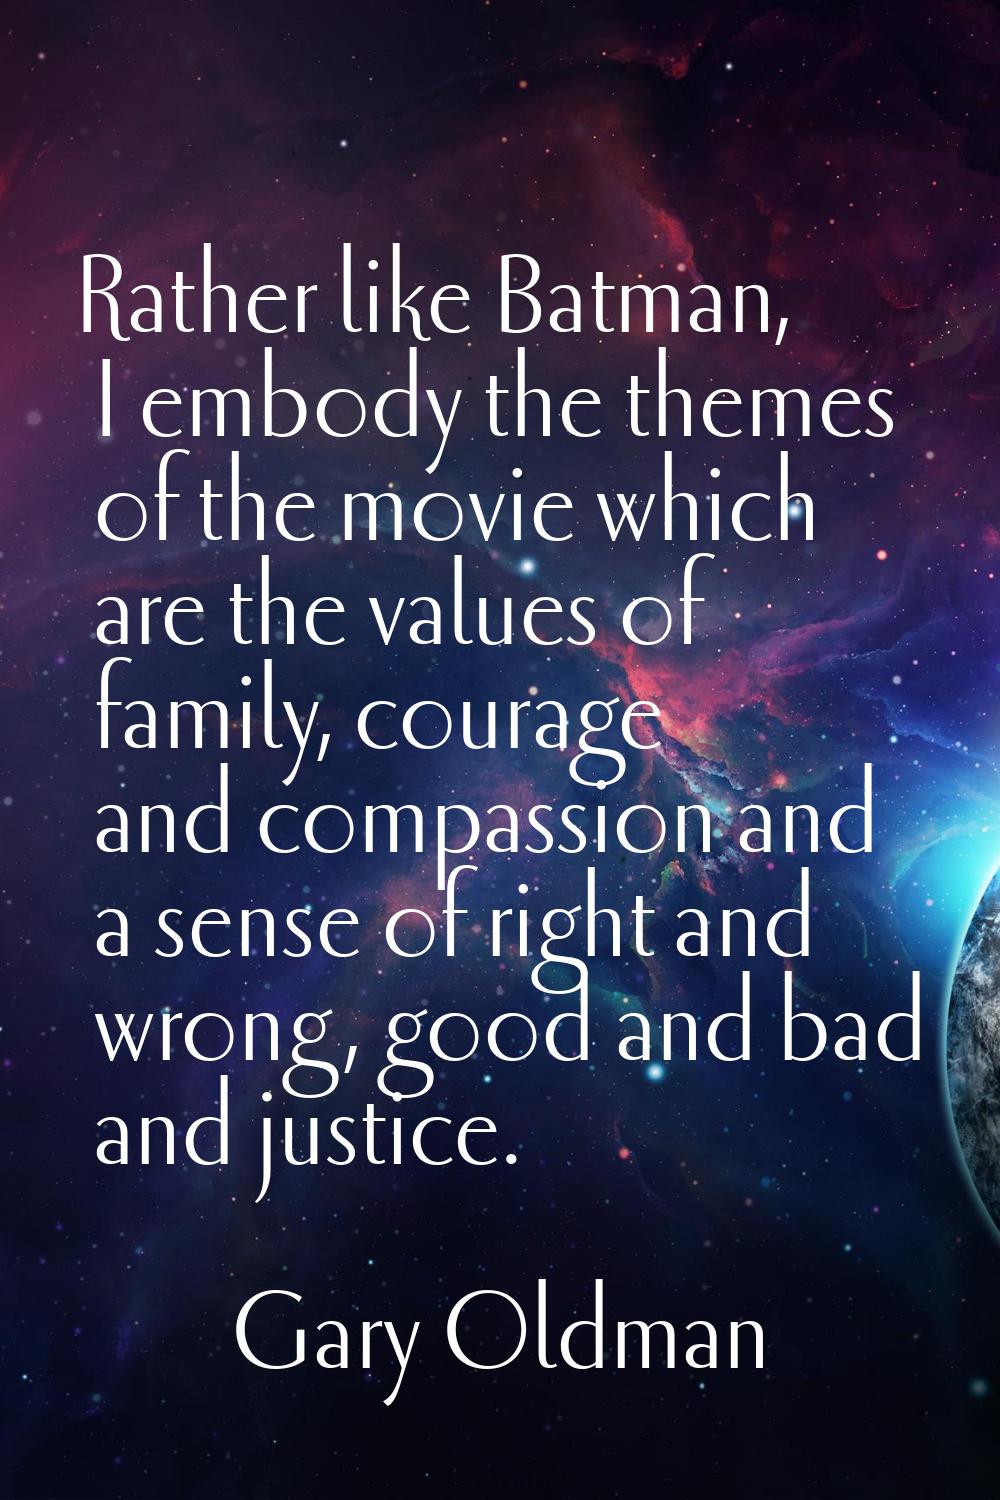 Rather like Batman, I embody the themes of the movie which are the values of family, courage and co